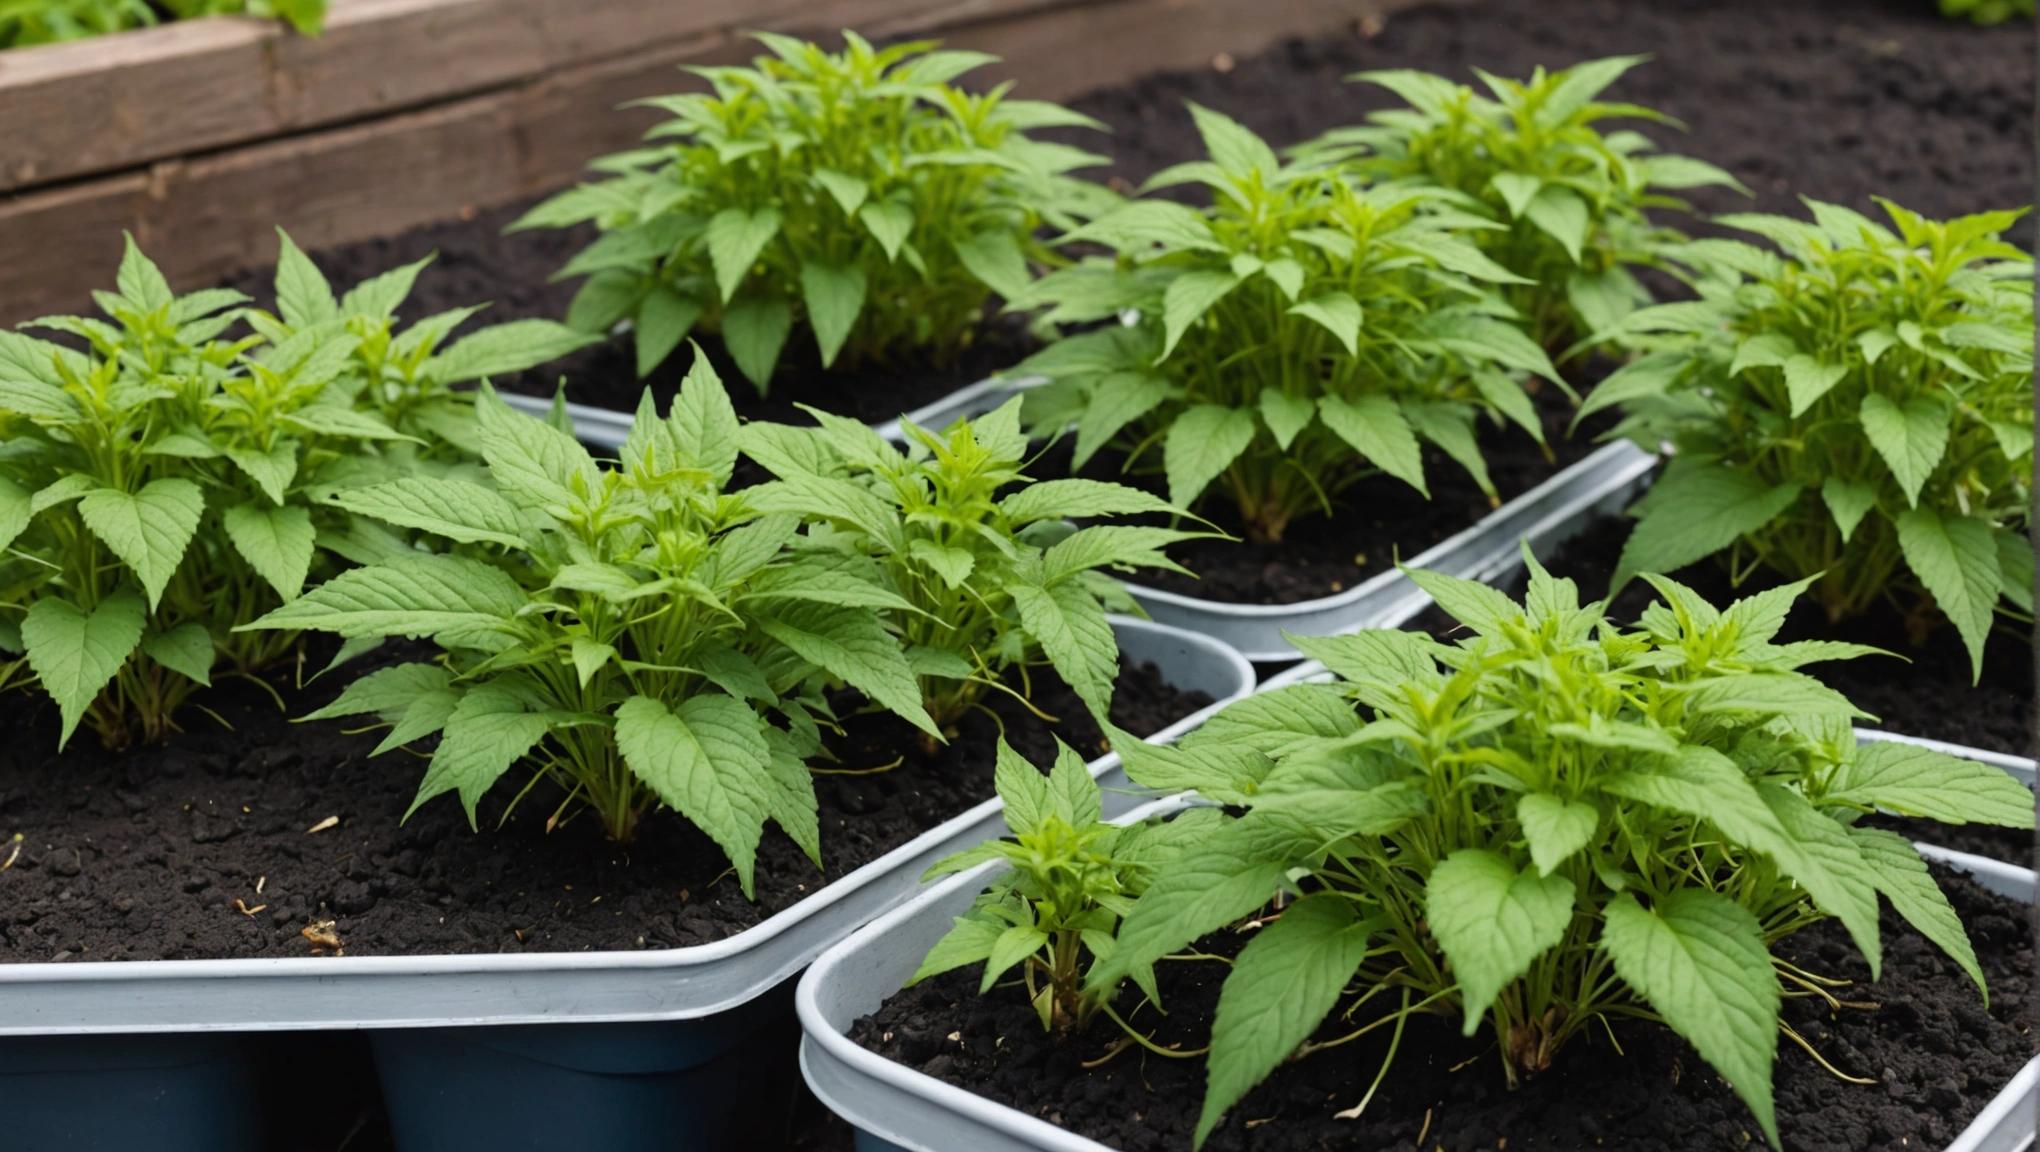 How to Grow Autoflower Seeds in Outdoor Soil - The Johnny Seeds Bank